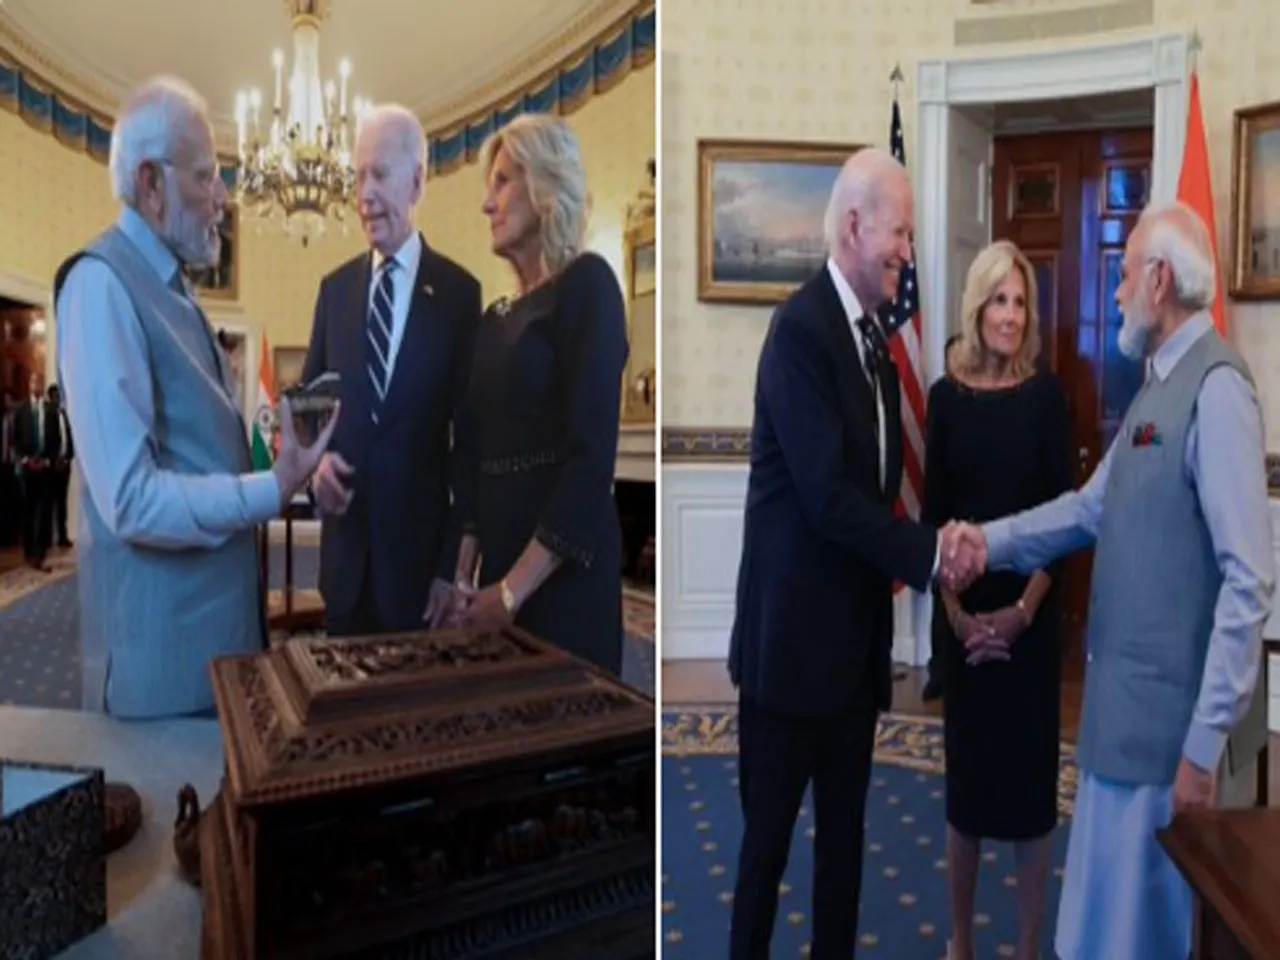 PM Modi completely impressed with the hospitality of the Biden couple